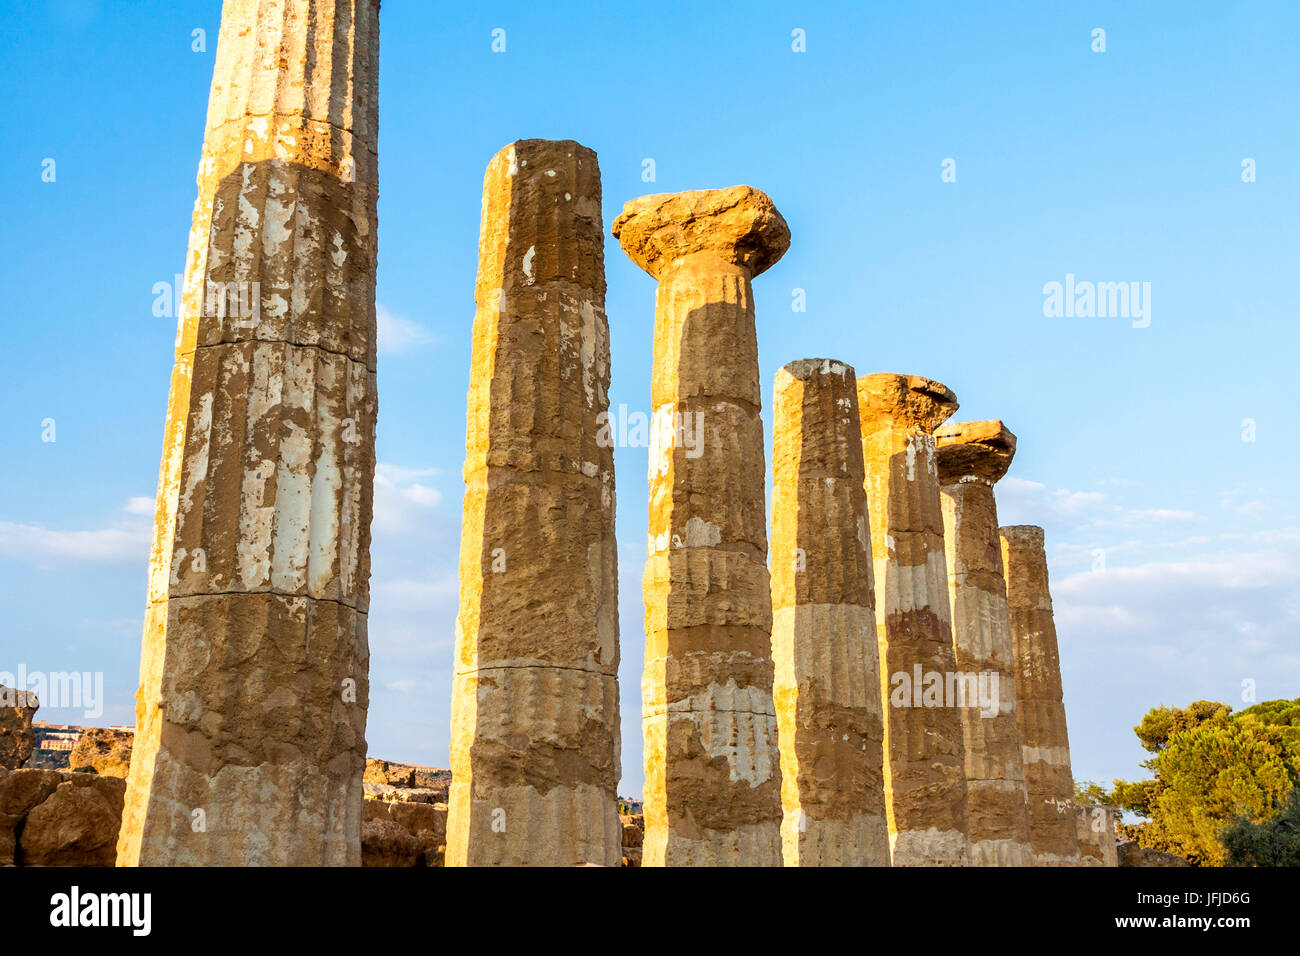 Temple of Ercole in the Valle dei Templi, an archaeological site in Agrigento, Sicily, Italy, Stock Photo